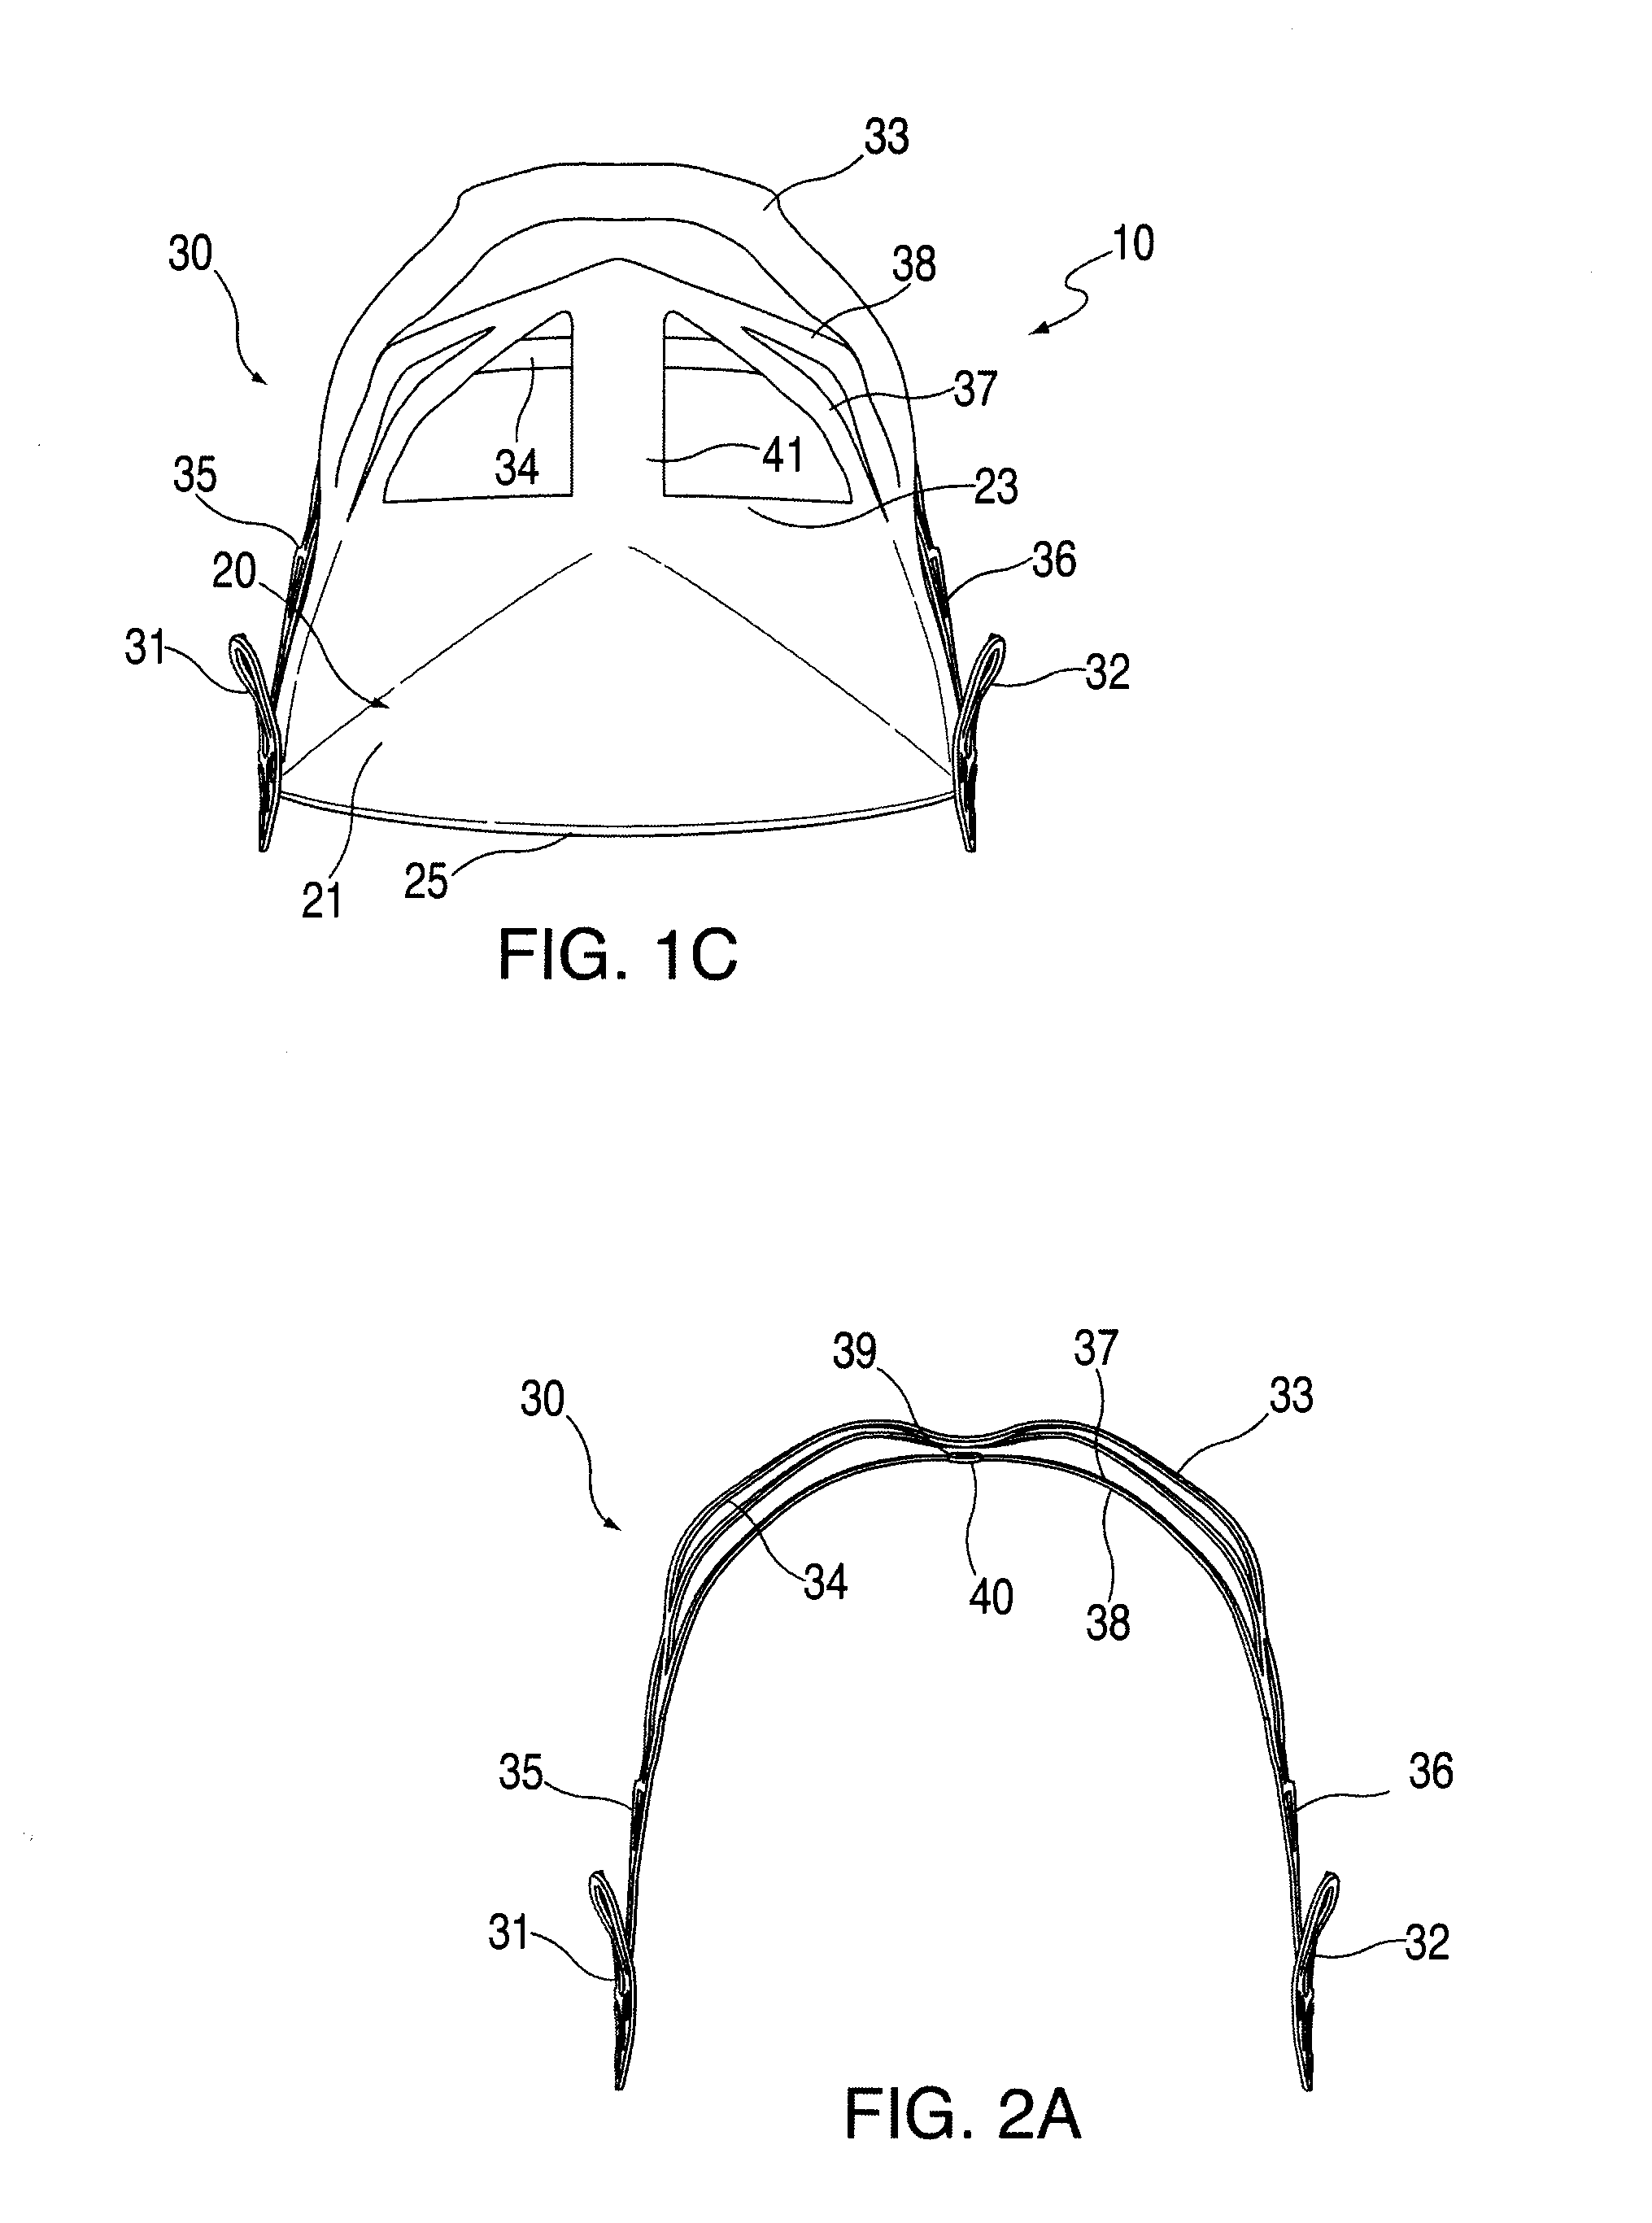 Prosthetic leaflet assembly for repairing a defective cardiac valve and methods of using the same